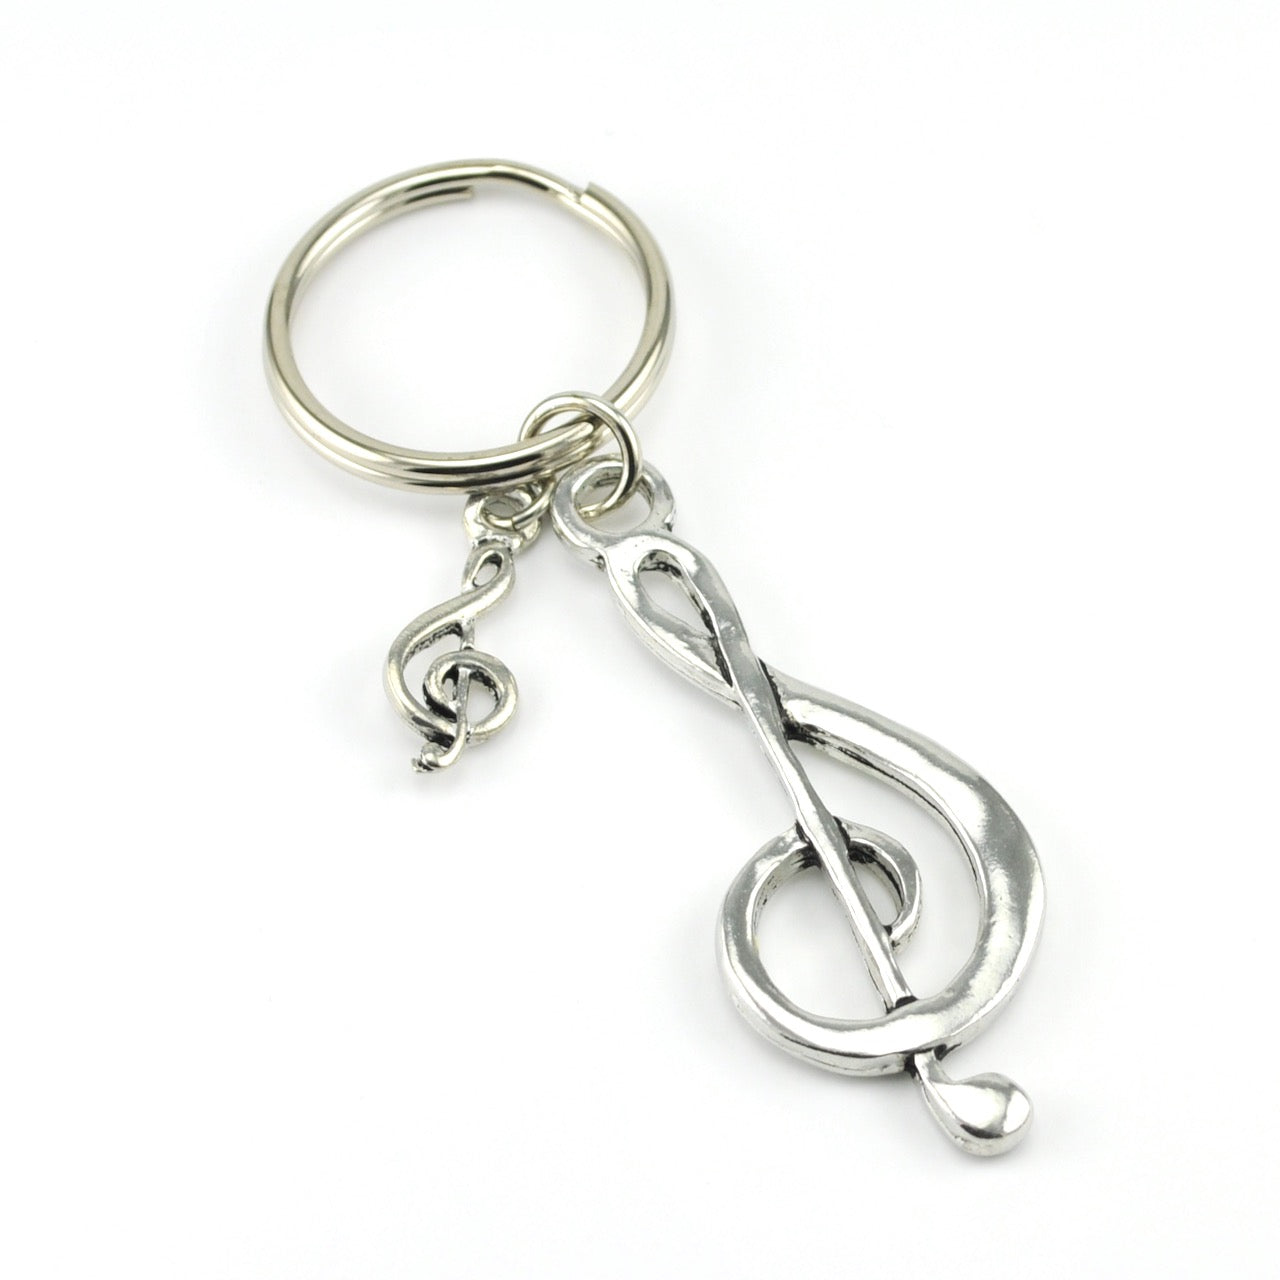 Handcrafted Pewter Treble Clef Key Chain